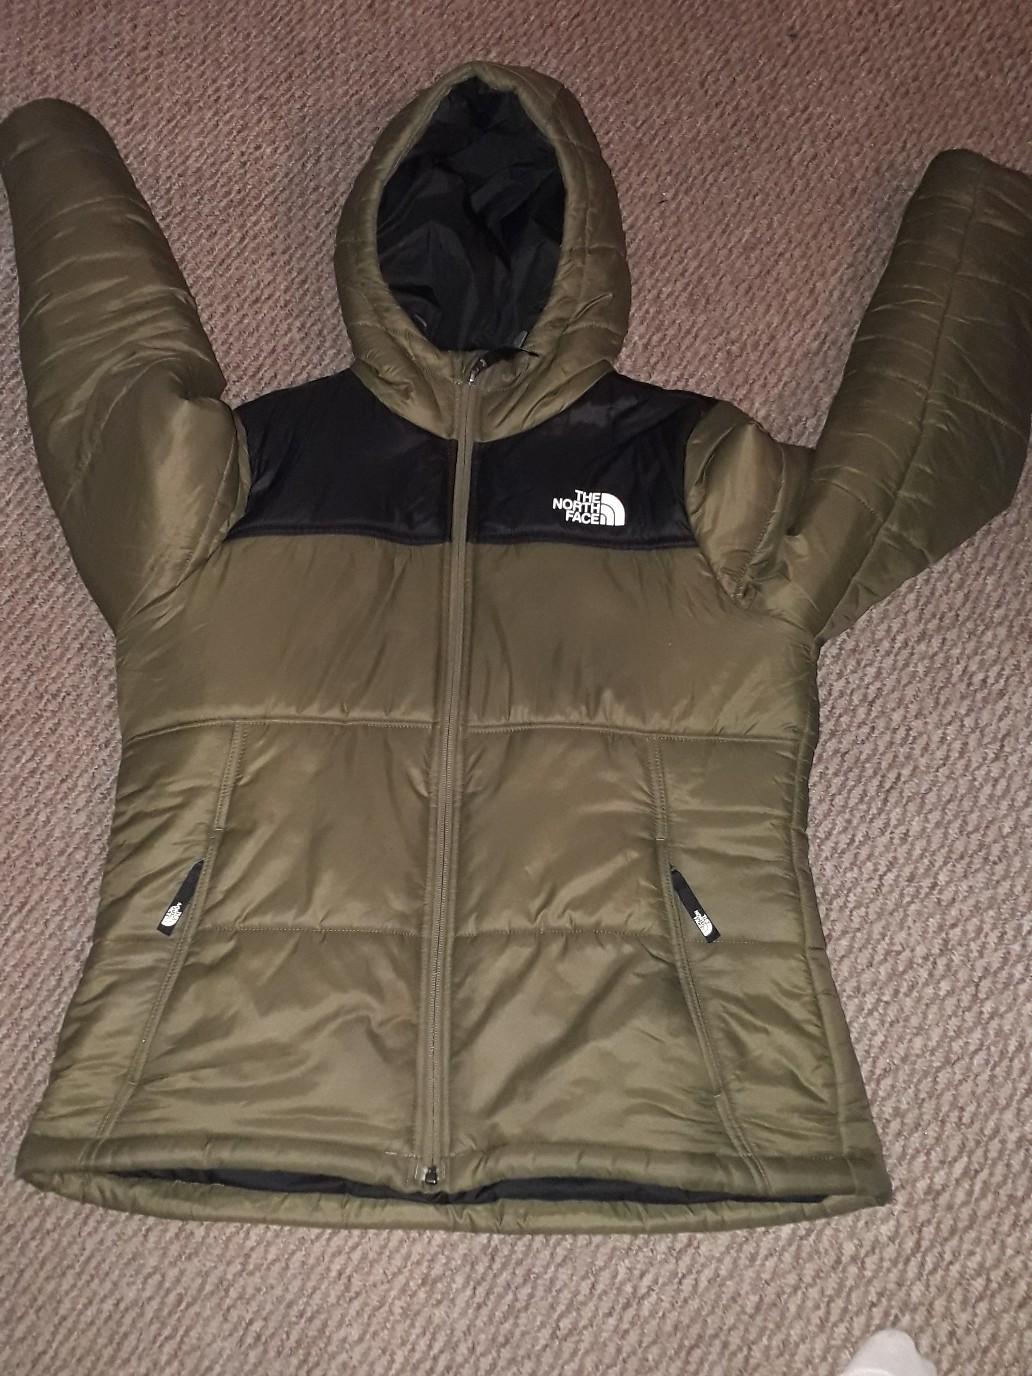 Womens The North Face Coat Jd Exclusive S 14 In S64 Doncaster For 60 00 For Sale Shpock